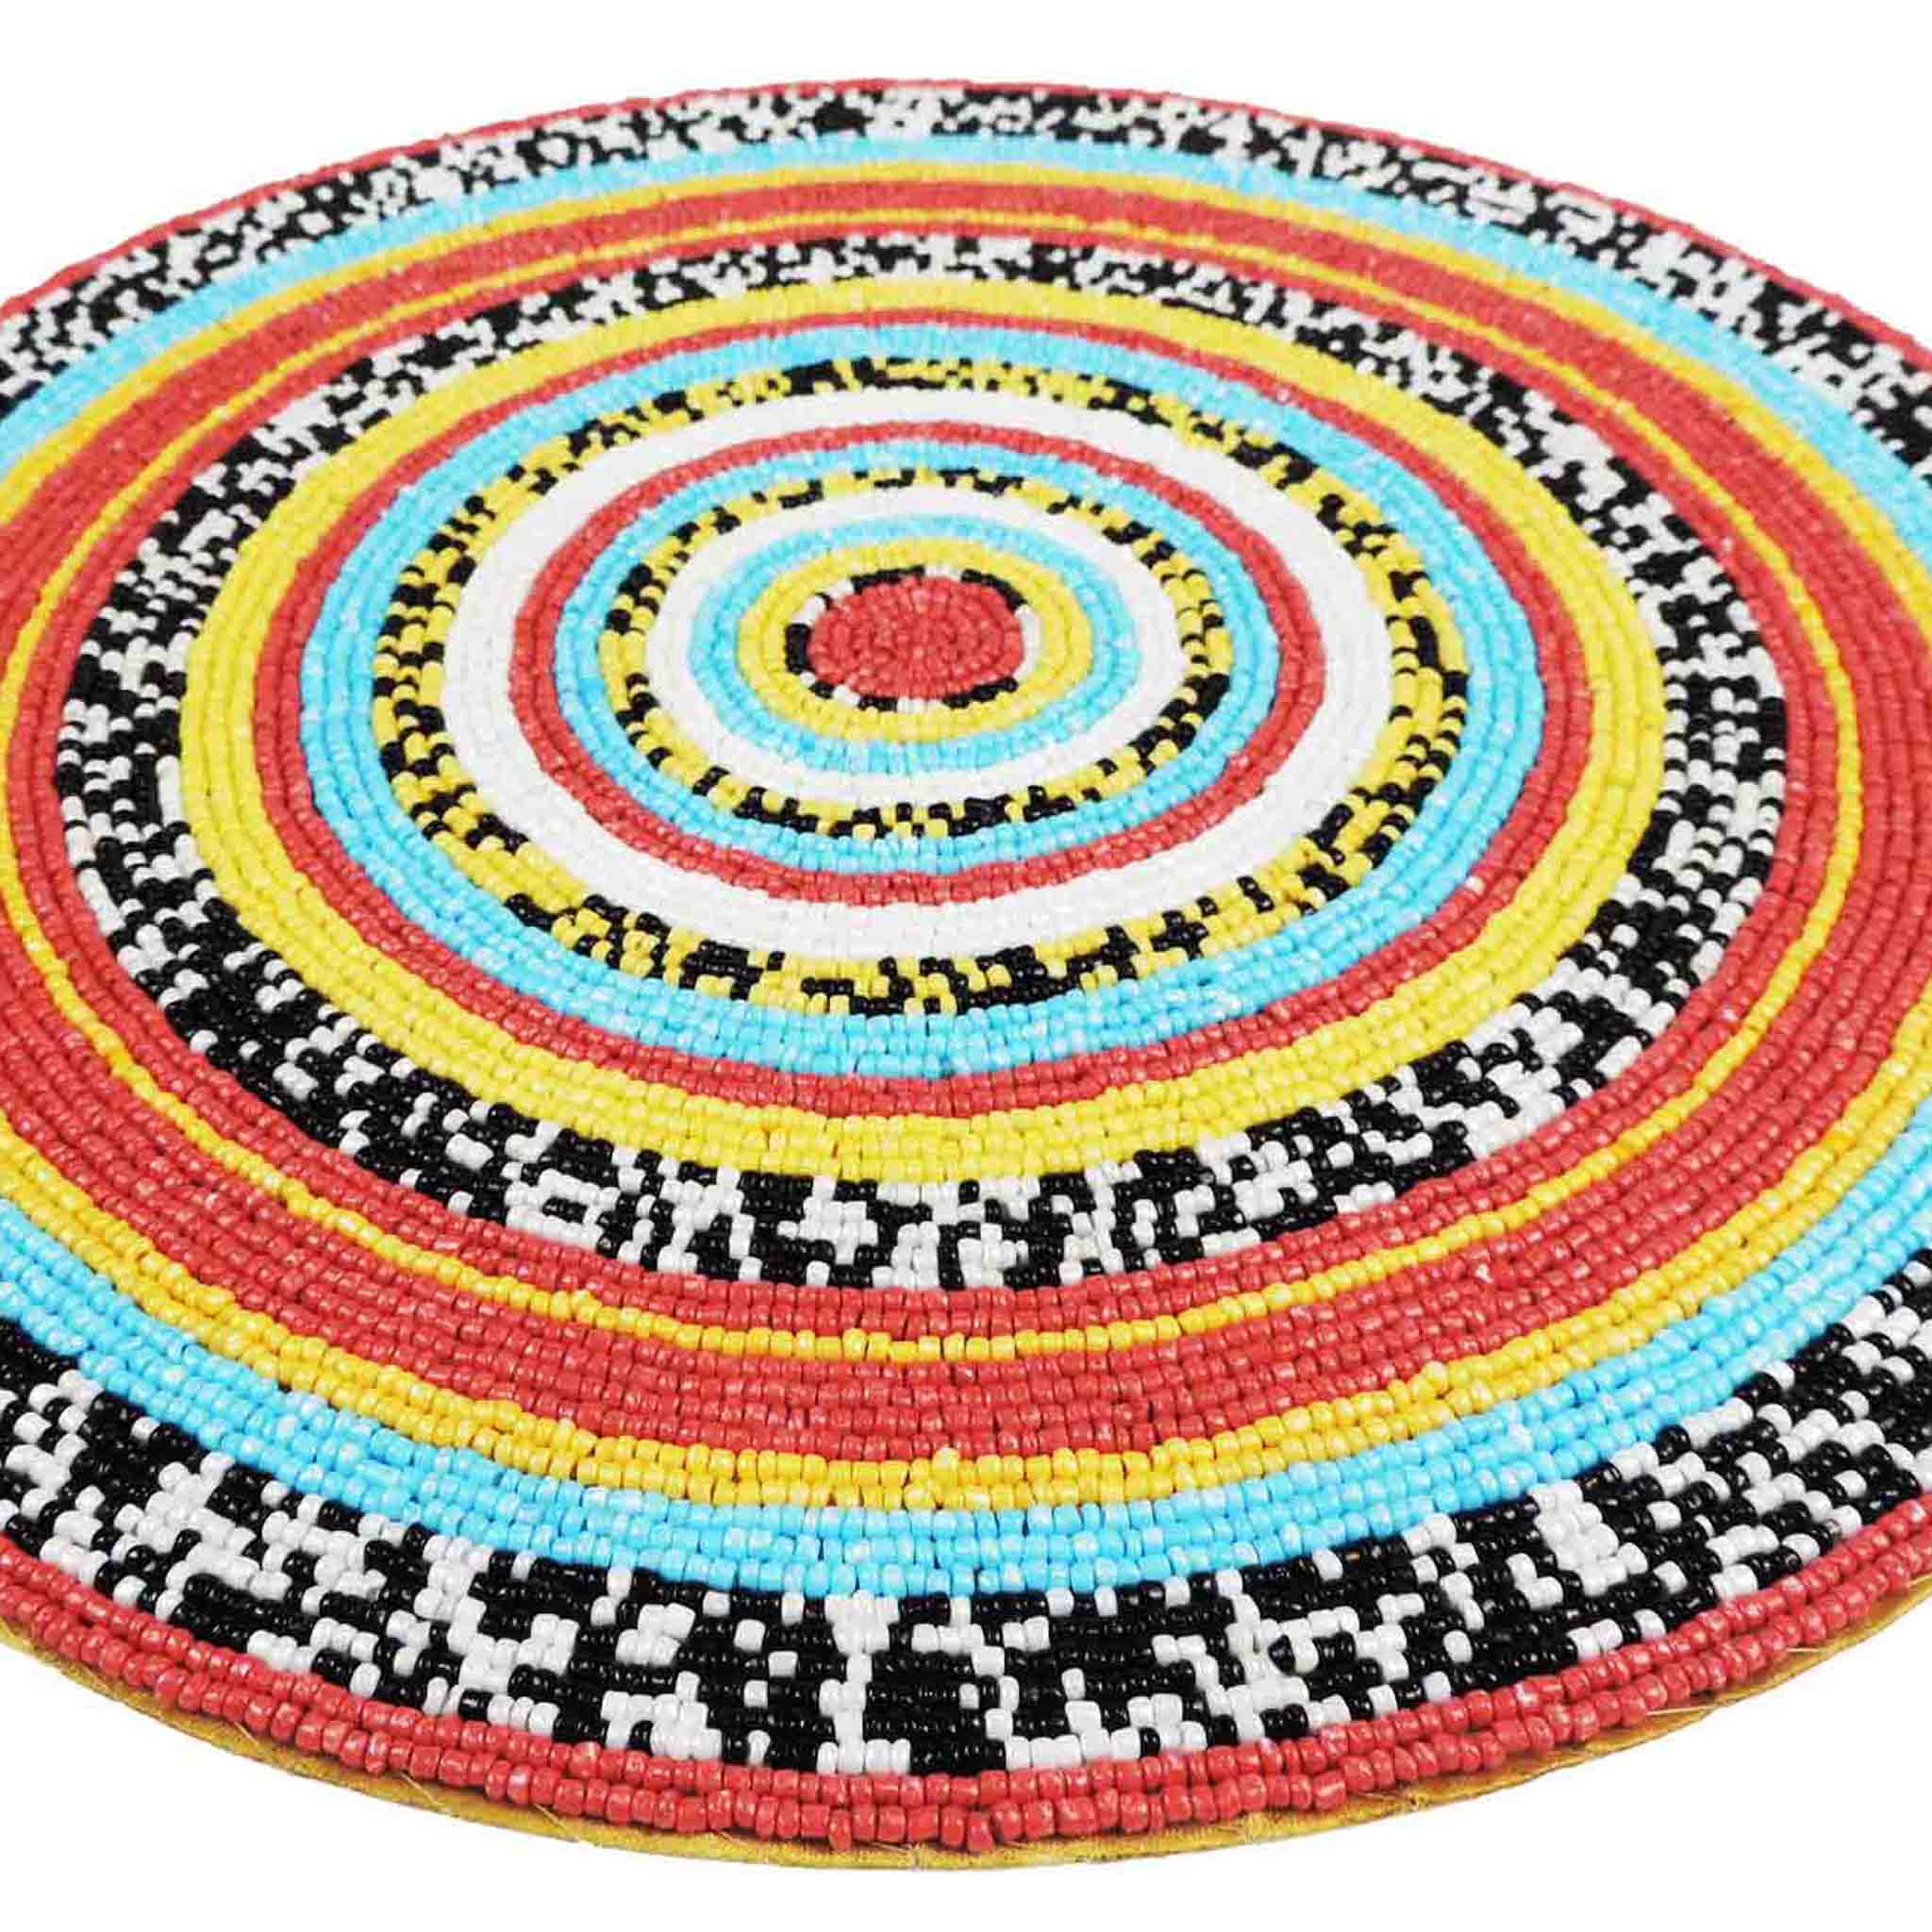 Fiesta Bead Embroidered Placemat in Multi, Set of 2/4